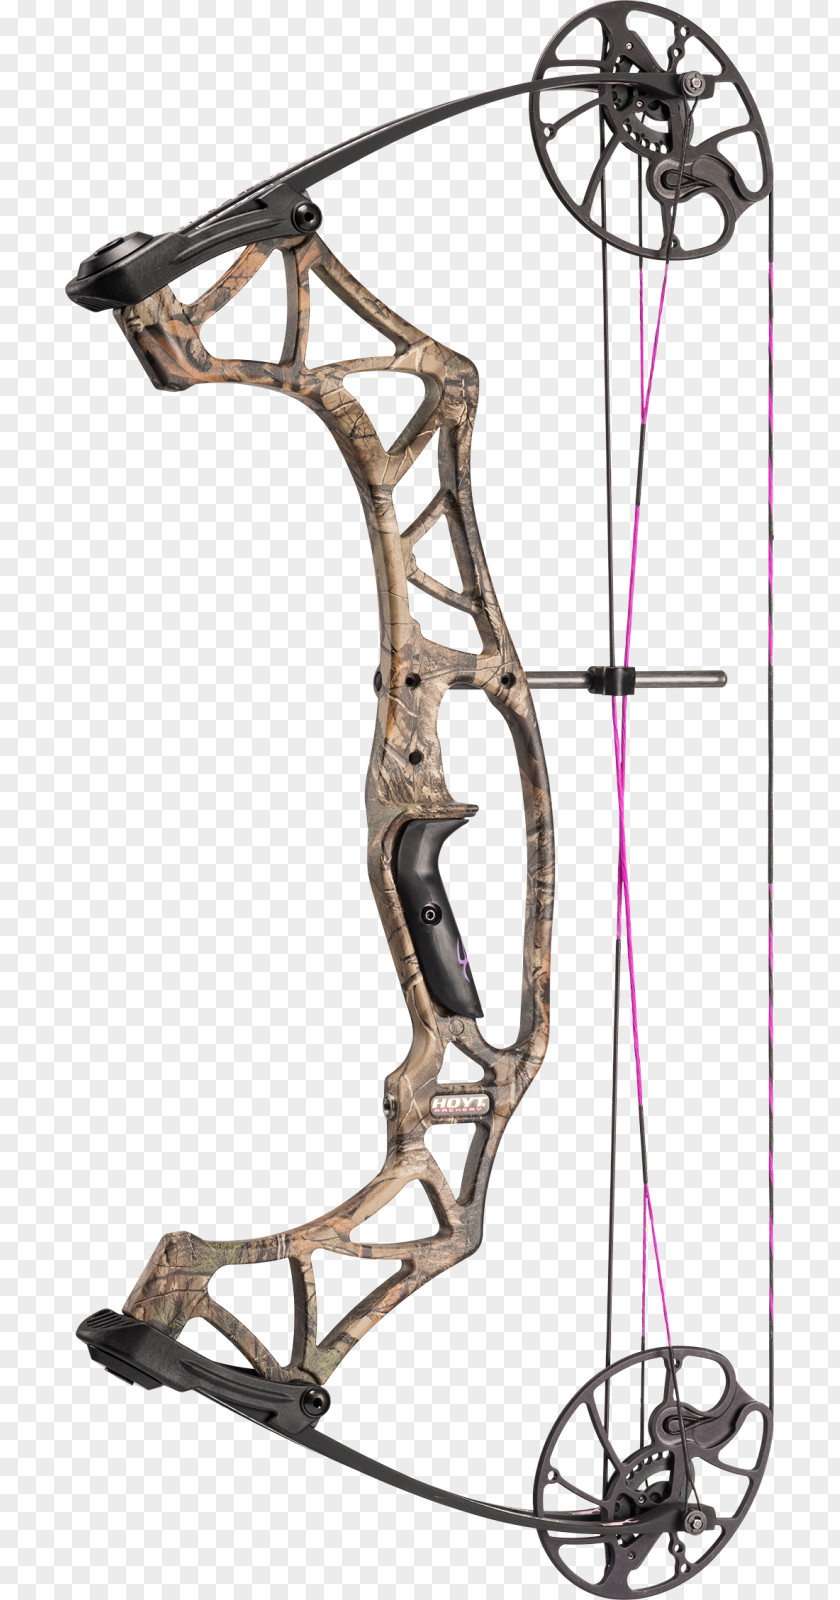 Kla Kila Compound Bows Hoyt Archery Bow And Arrow Bowhunting PNG